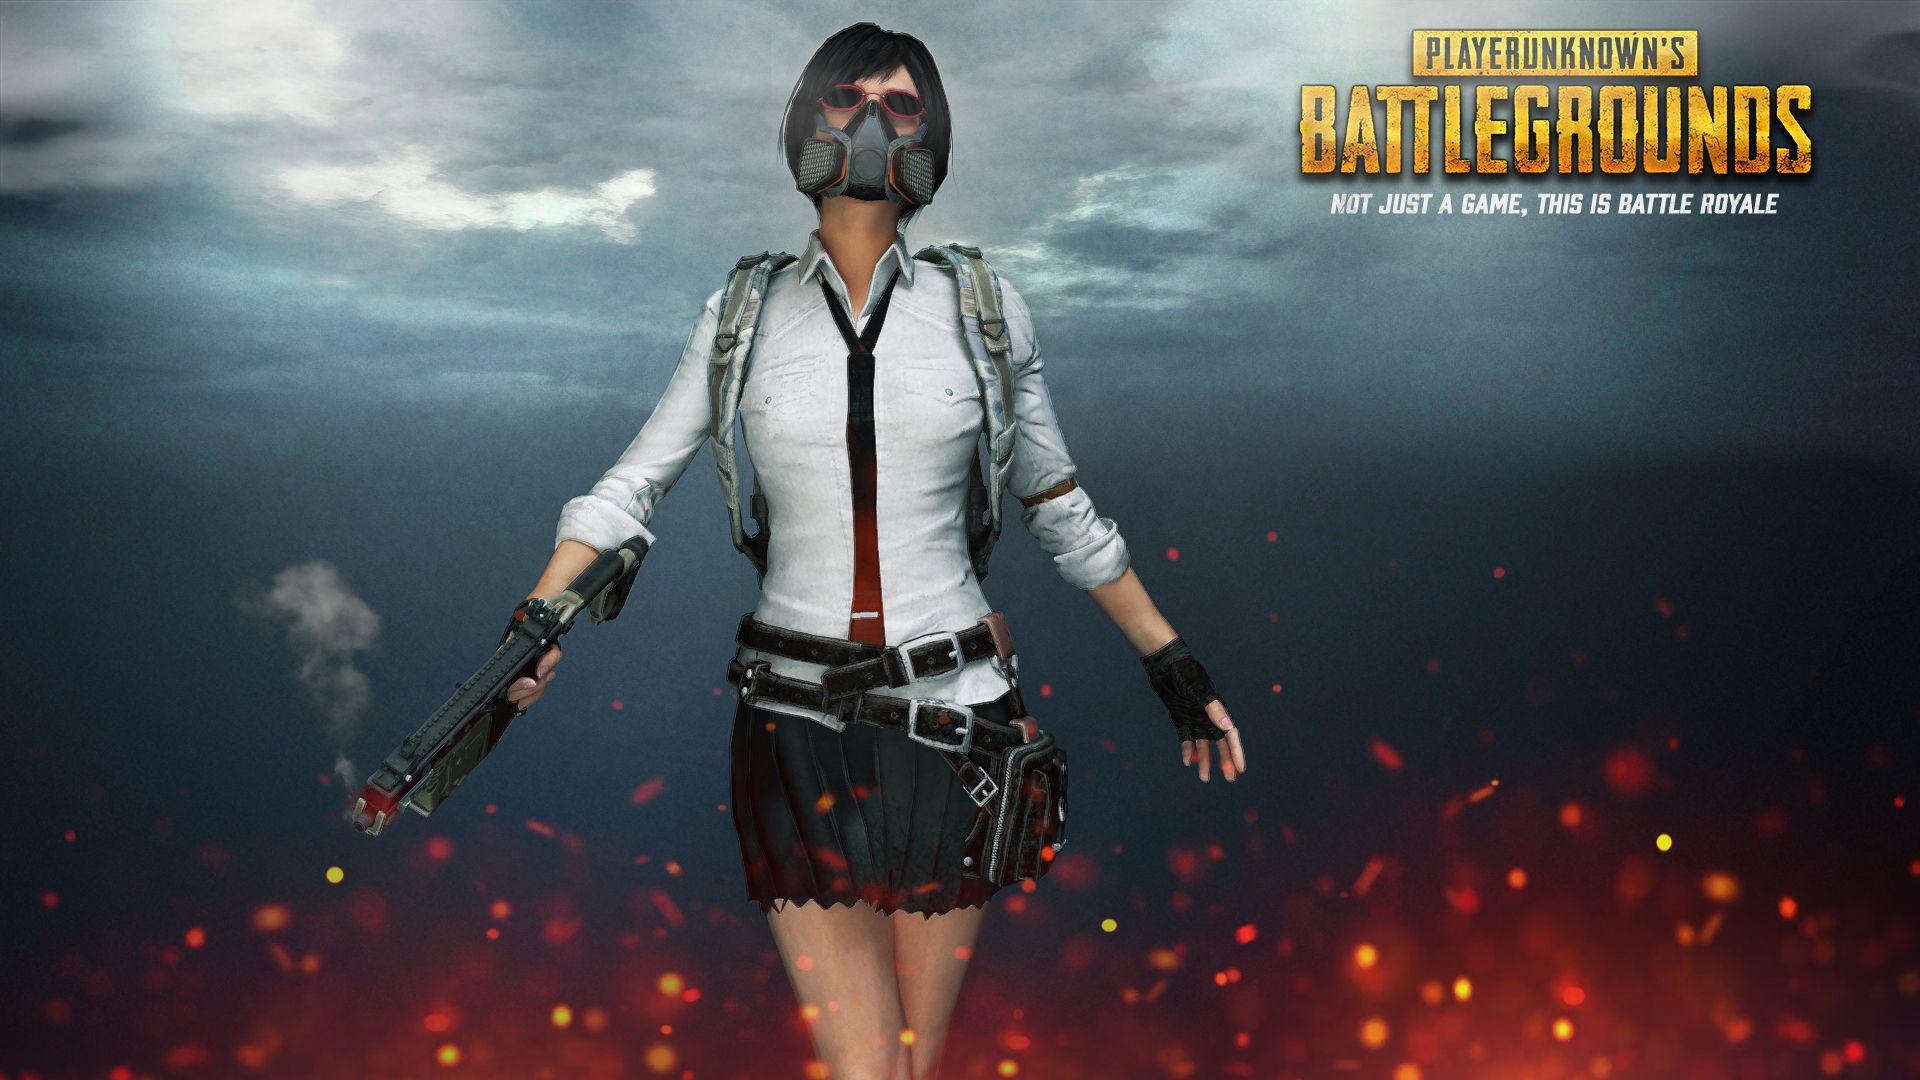 PlayerUnknown's Battlegrounds wallpaper, Picture, Image